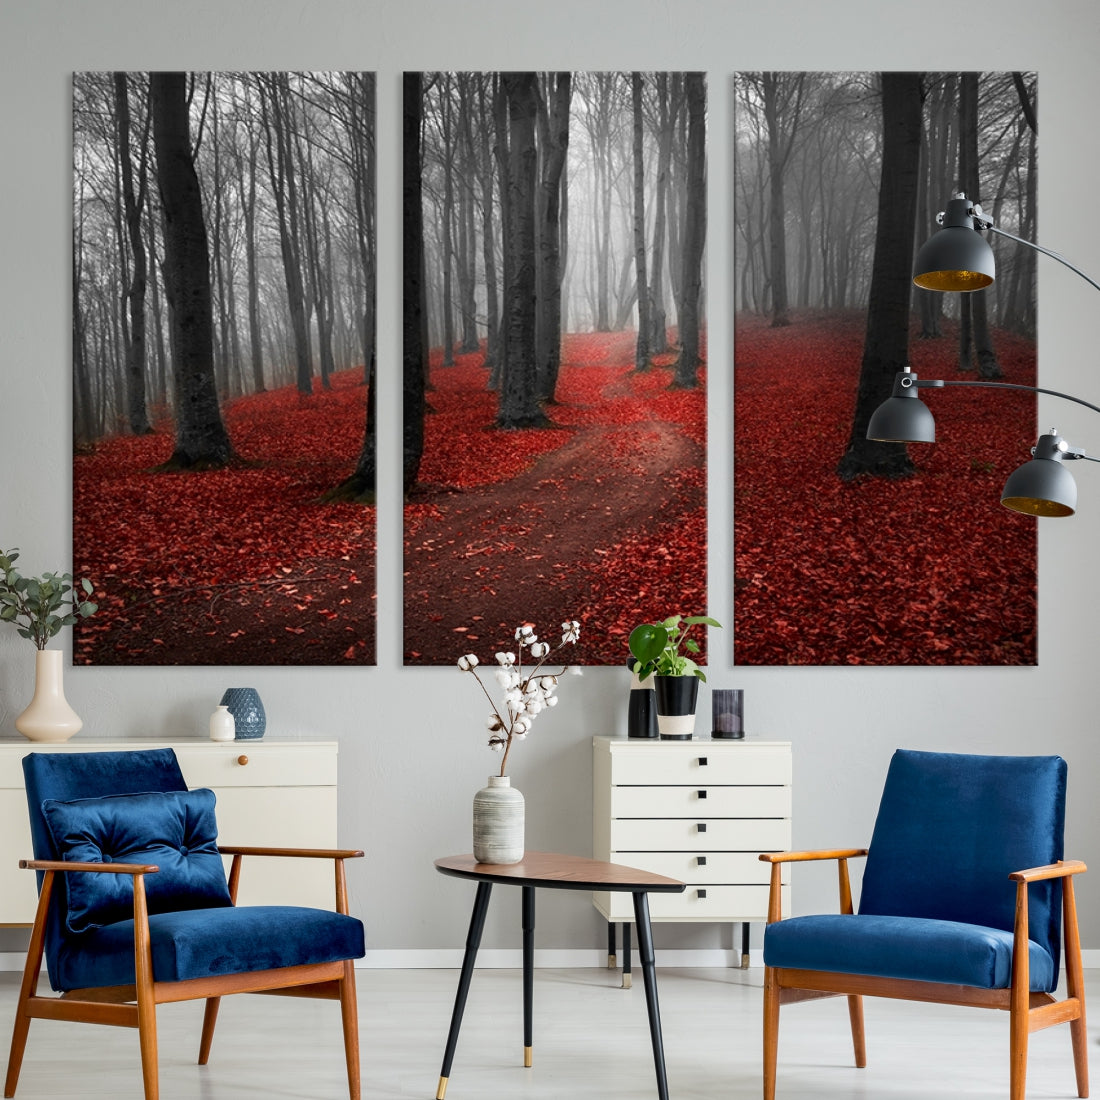 Wonderful Forest with Red Leaves on Ground Large Wall Art Landscape Canvas Print